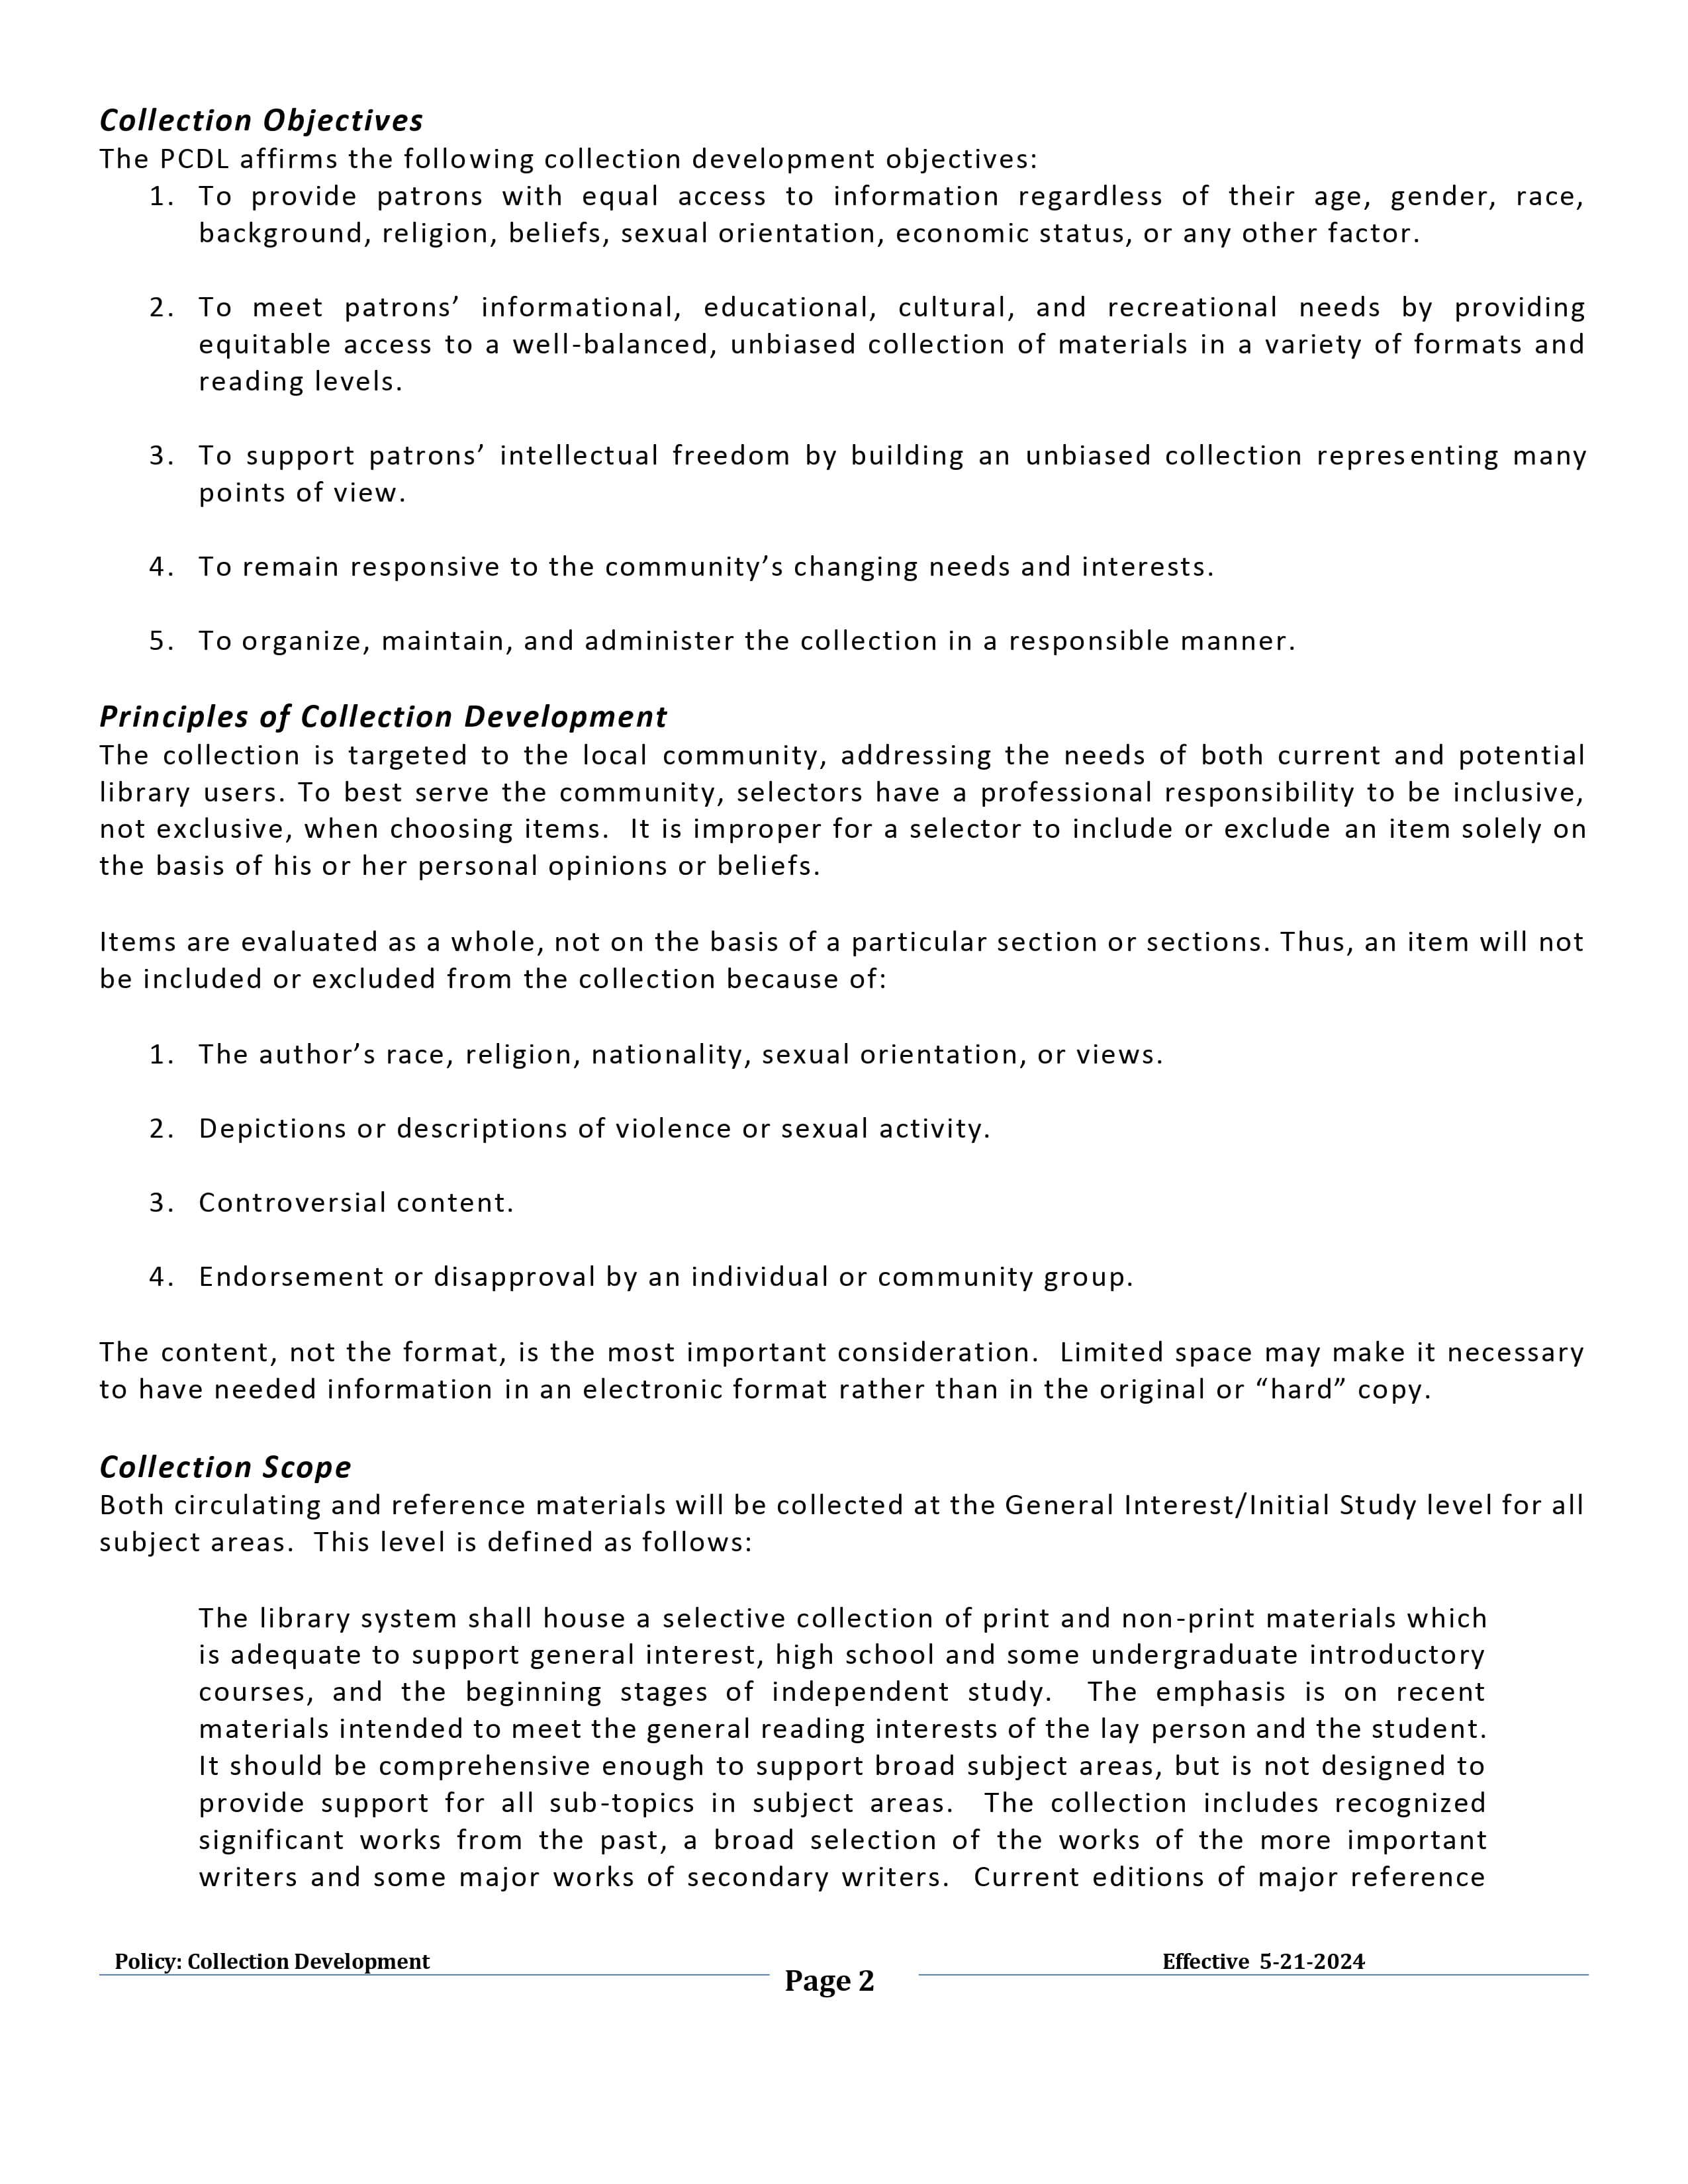 Collection Development Policy Page 2